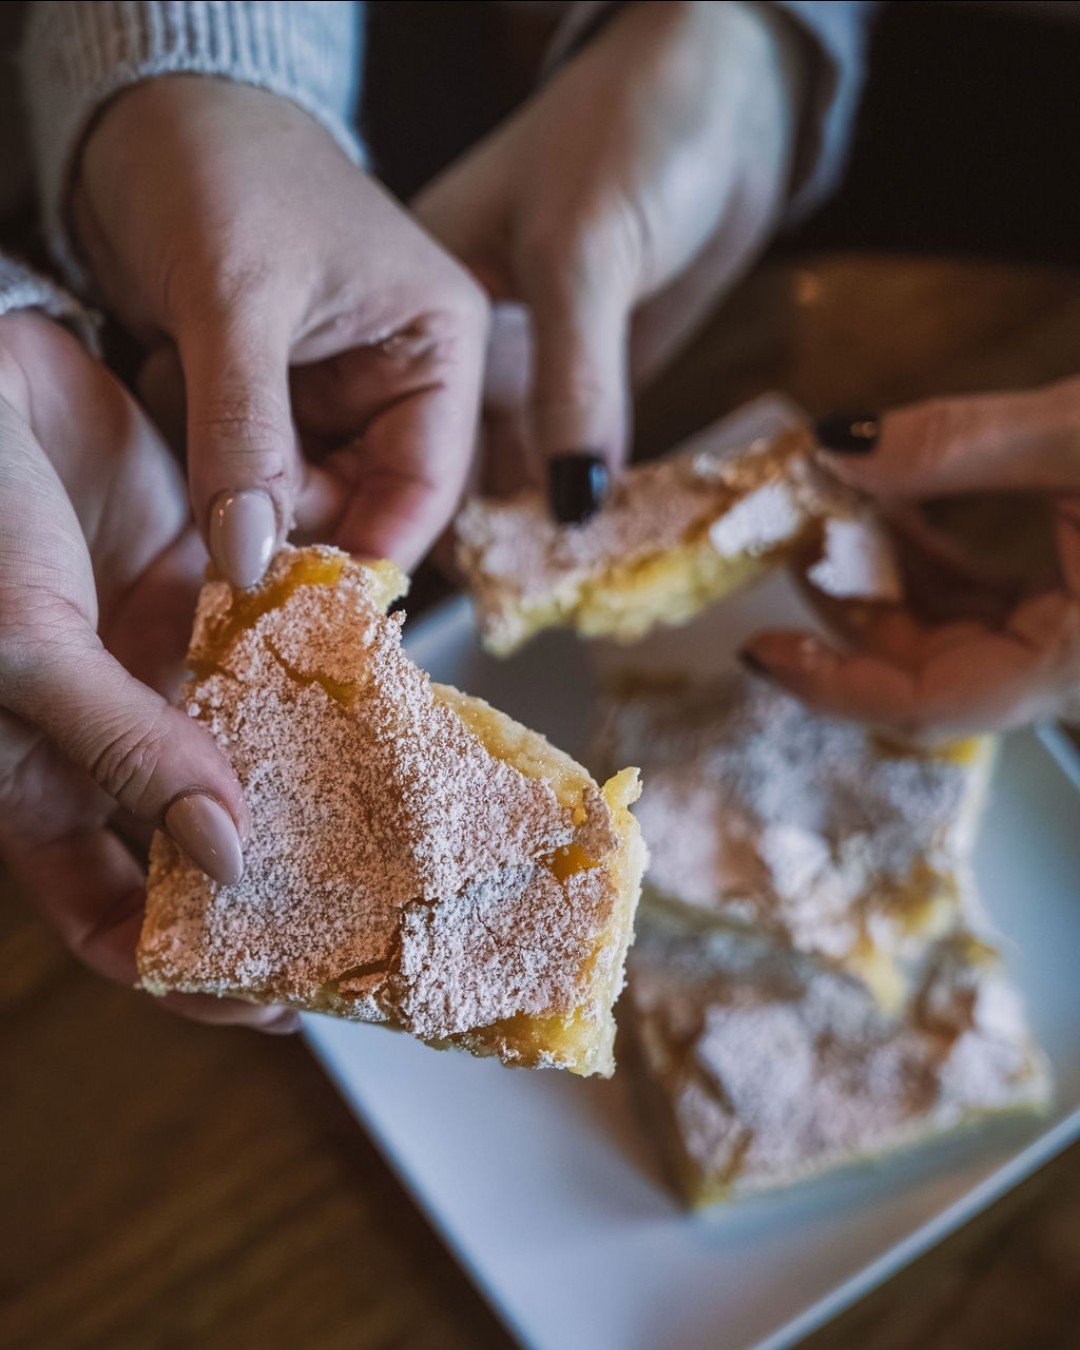 Our lemon bars taste like spring 🍋 Order a few for the table - or for yourself. You don't have to share 😉 They're perfect for Mother's Day, too!